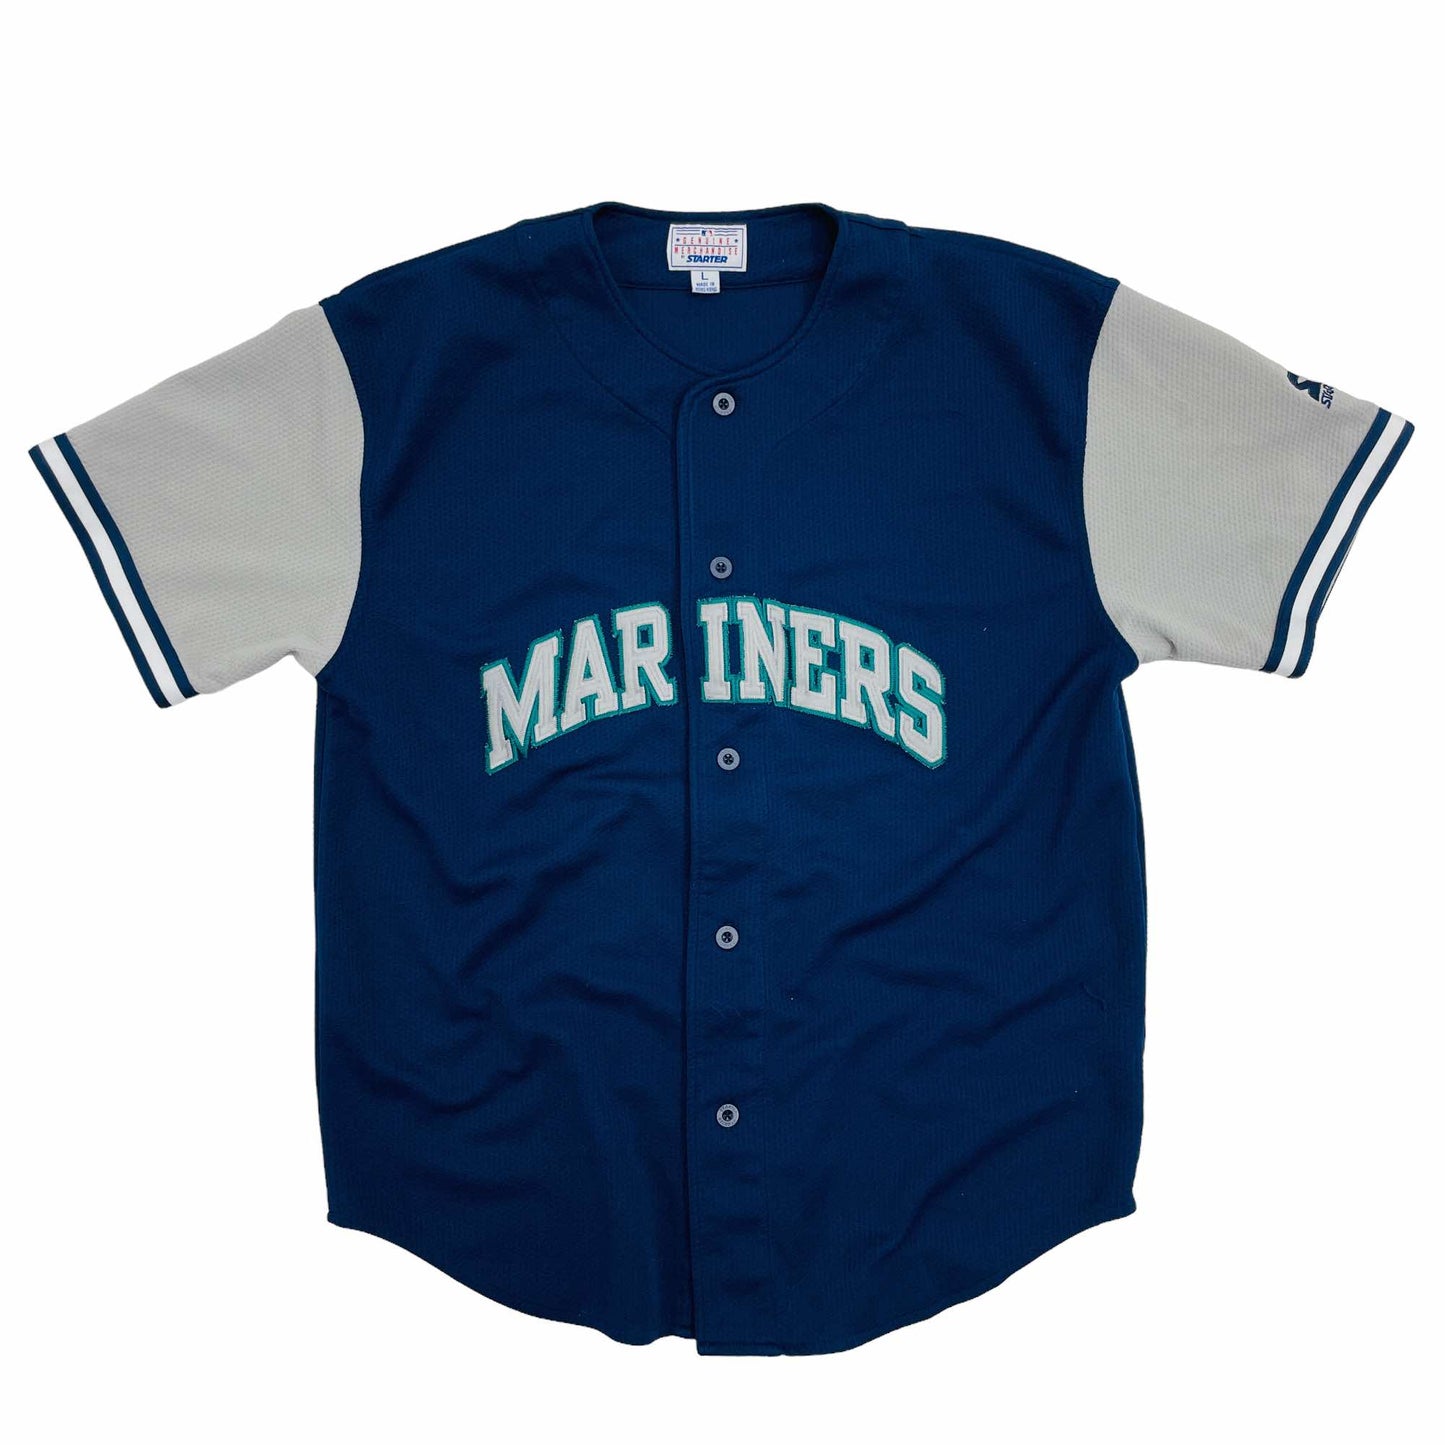 Seattle Mariners T-Shirt Men's Large The Kingdome Retro Colors Logo PREOWNED